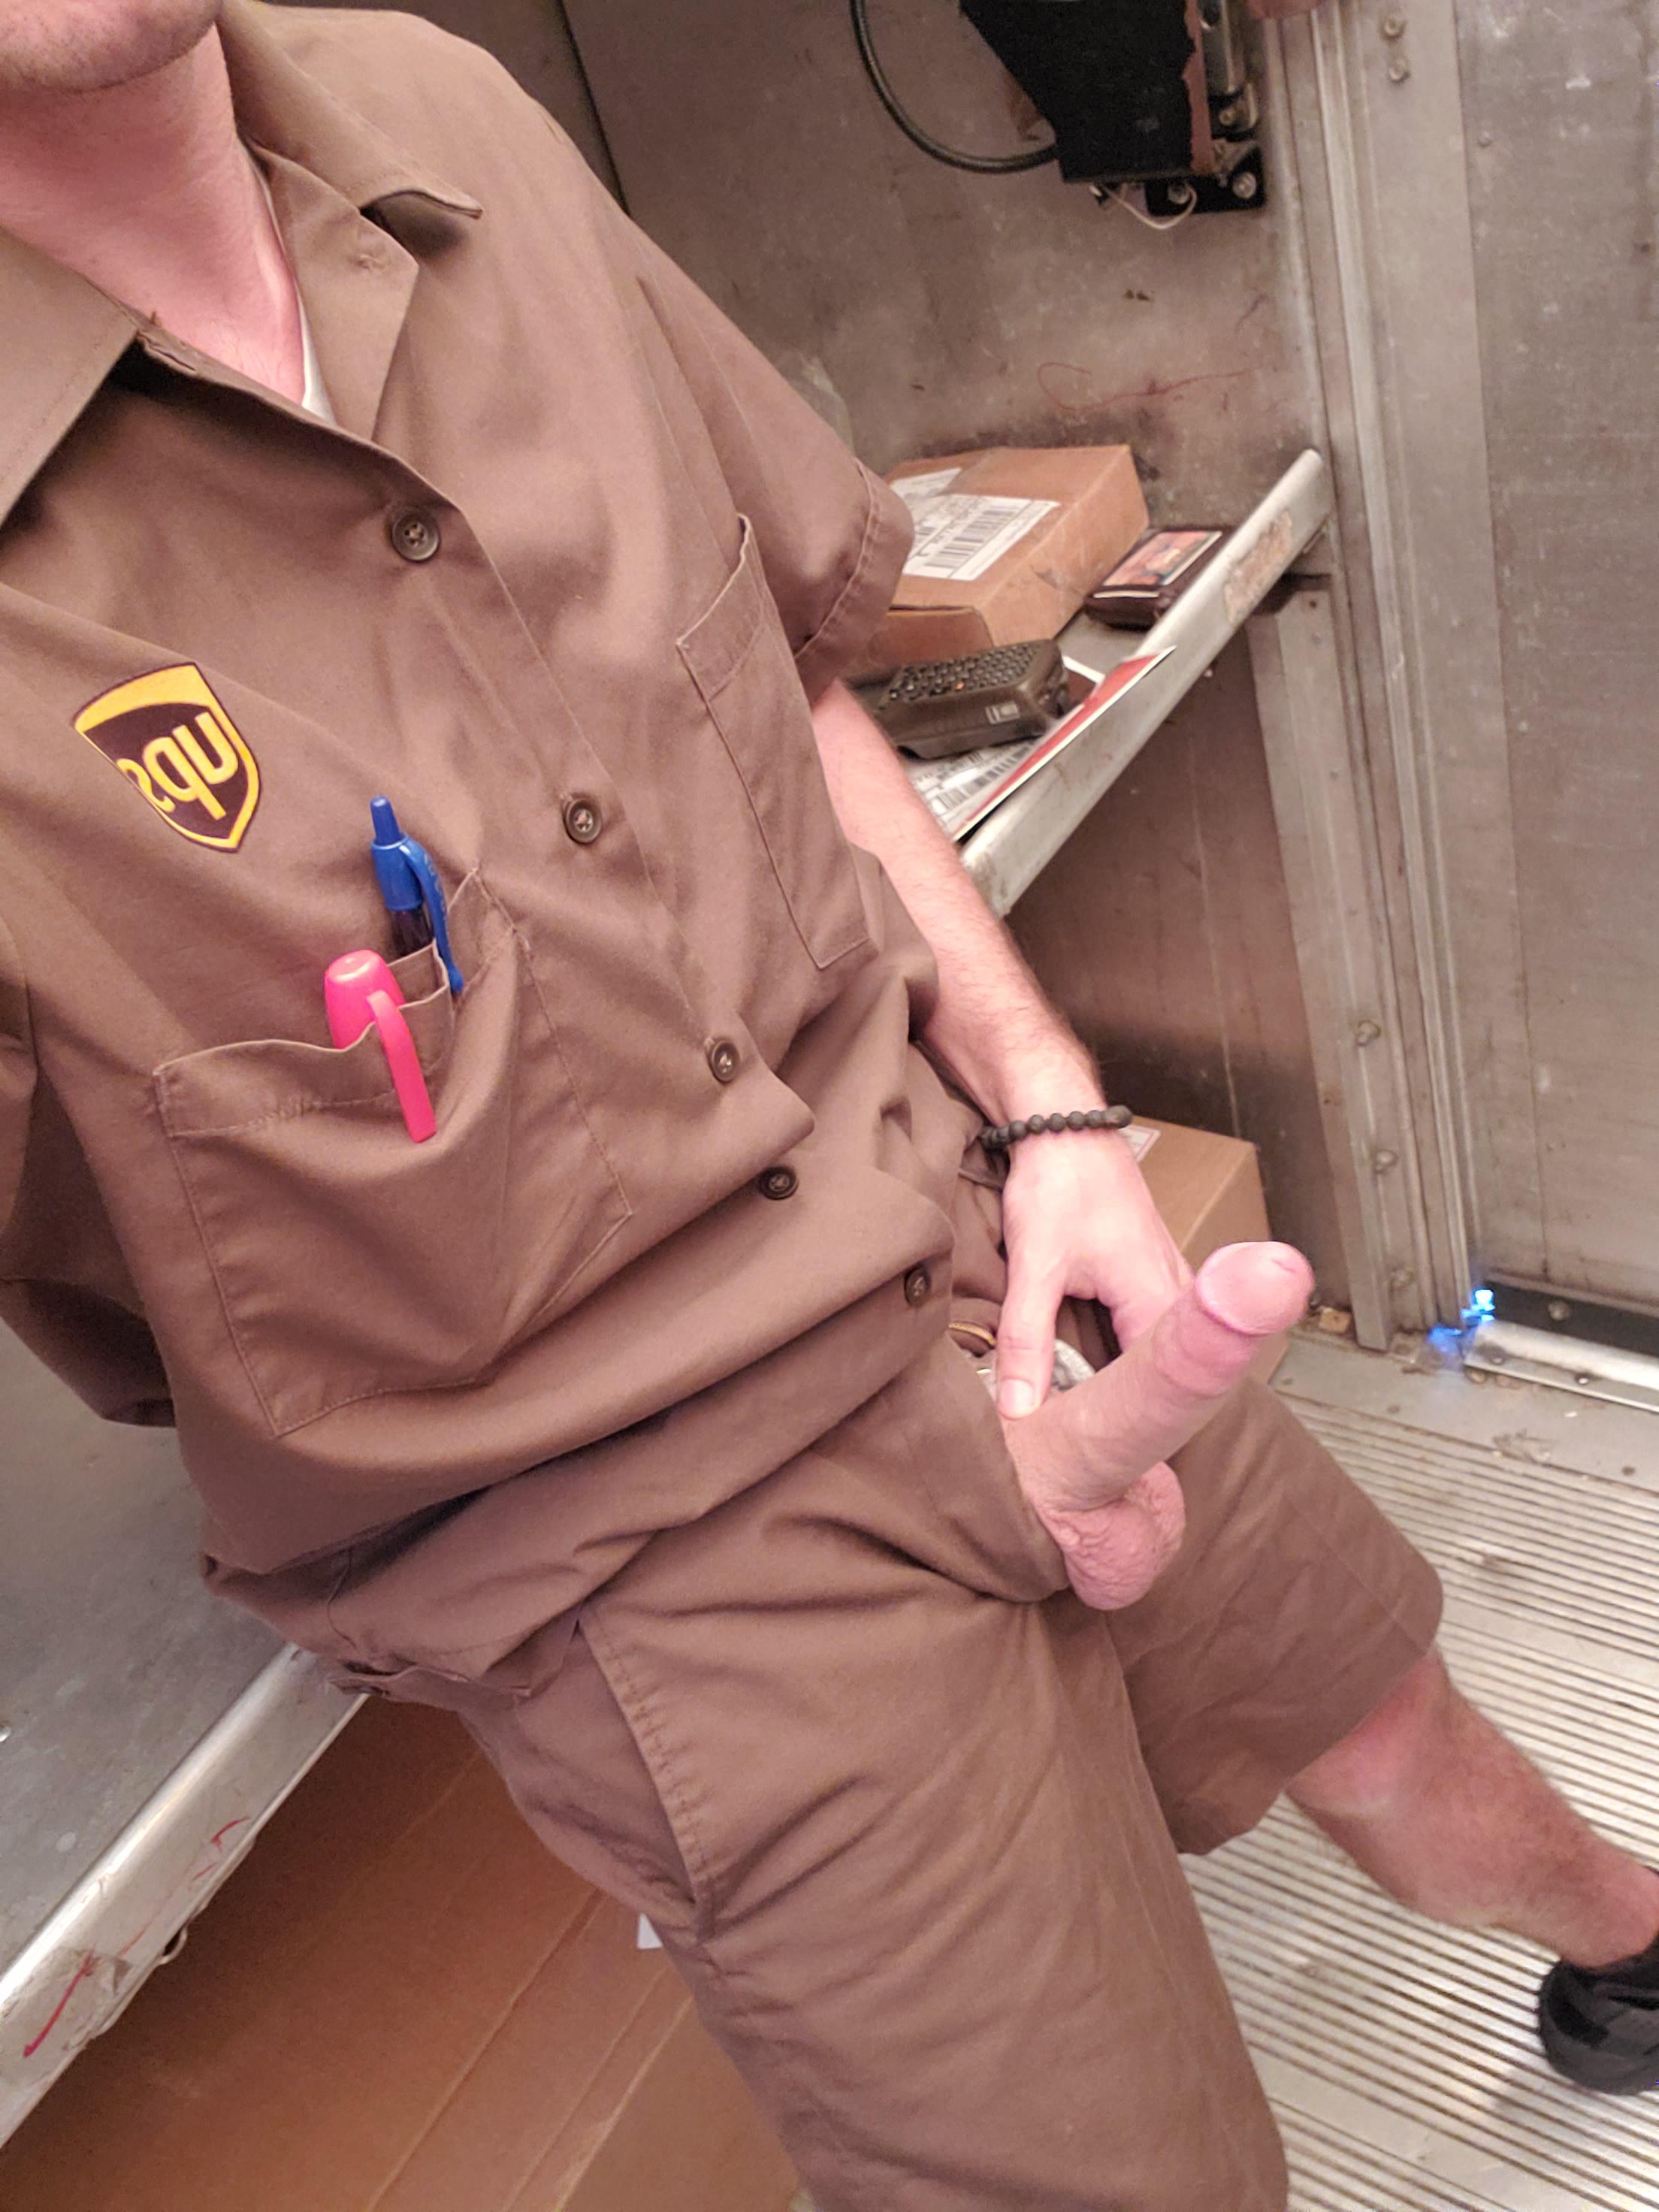 UPS guy shows cock